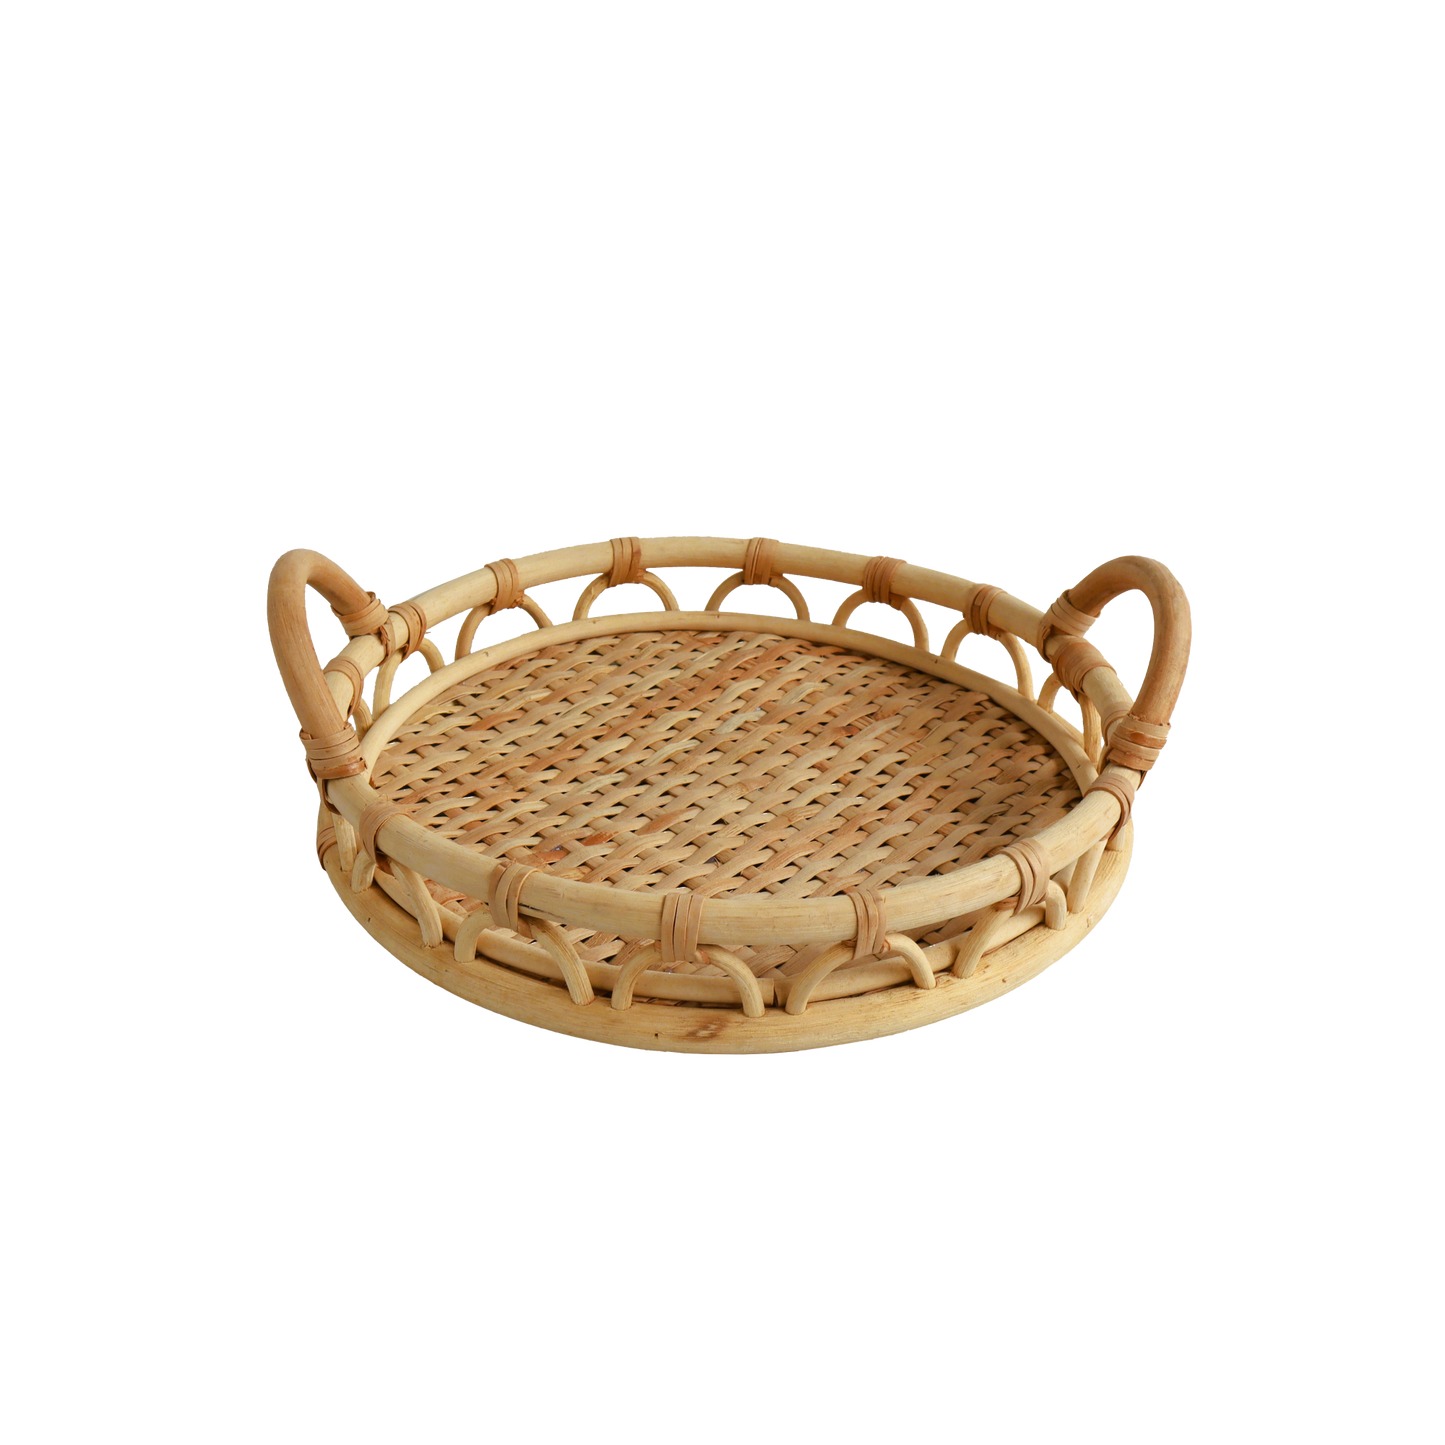 Eden Grace Set of 3 Hand Woven Round Rattan Serving Trays with Wavy Design and Handles, Tea Tray, Fruit Basket for Coffee Table and Breakfasts